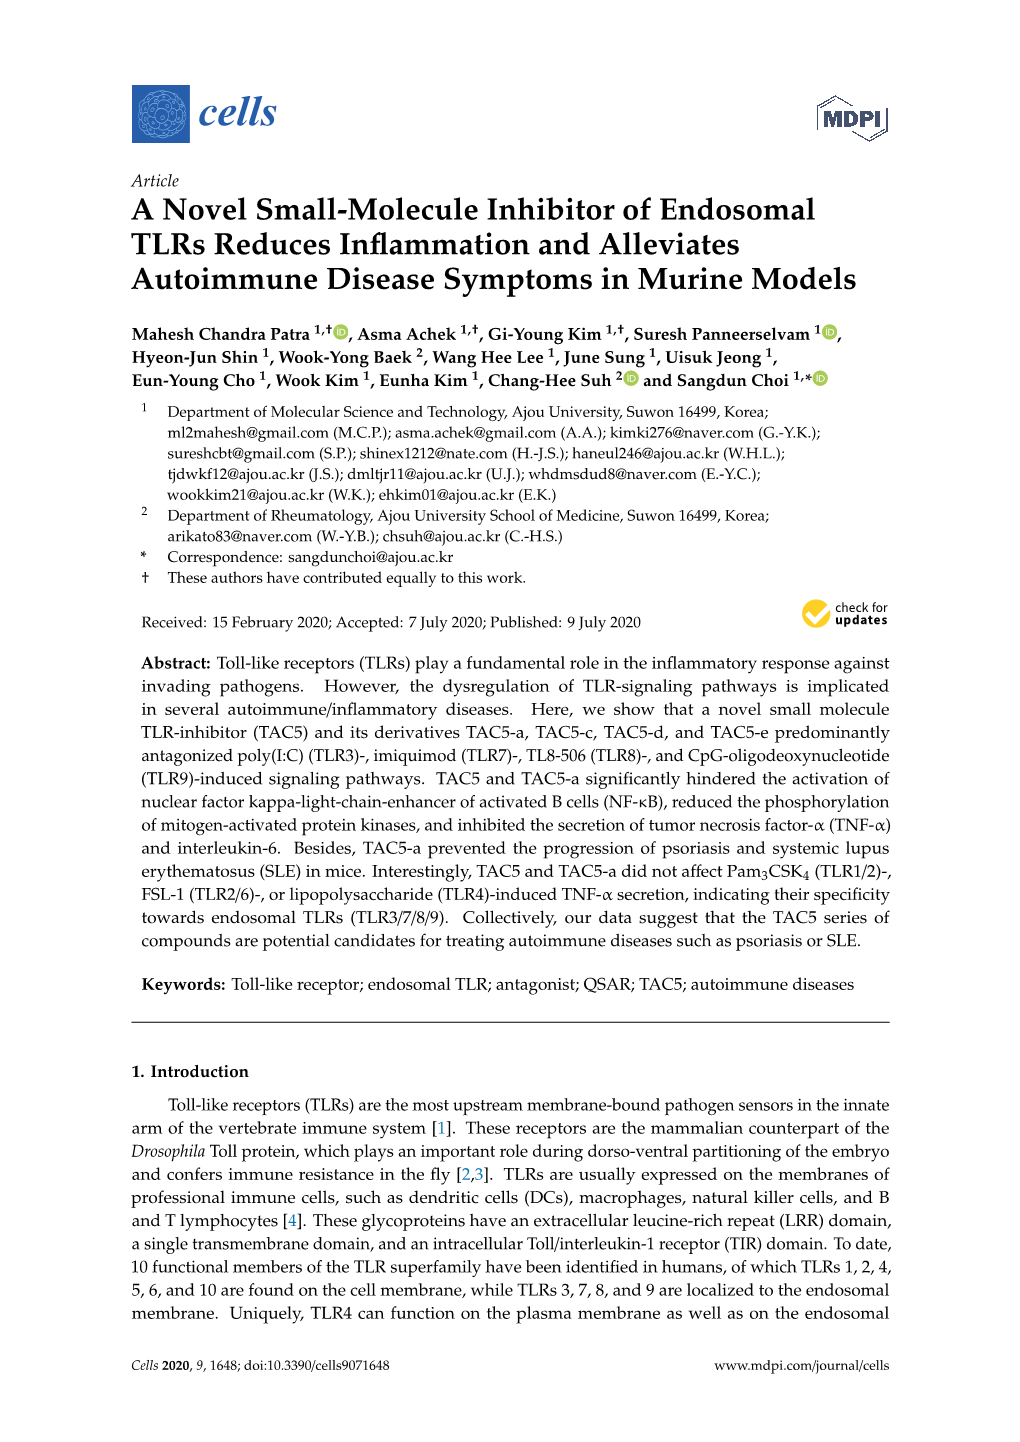 A Novel Small-Molecule Inhibitor of Endosomal Tlrs Reduces Inﬂammation and Alleviates Autoimmune Disease Symptoms in Murine Models